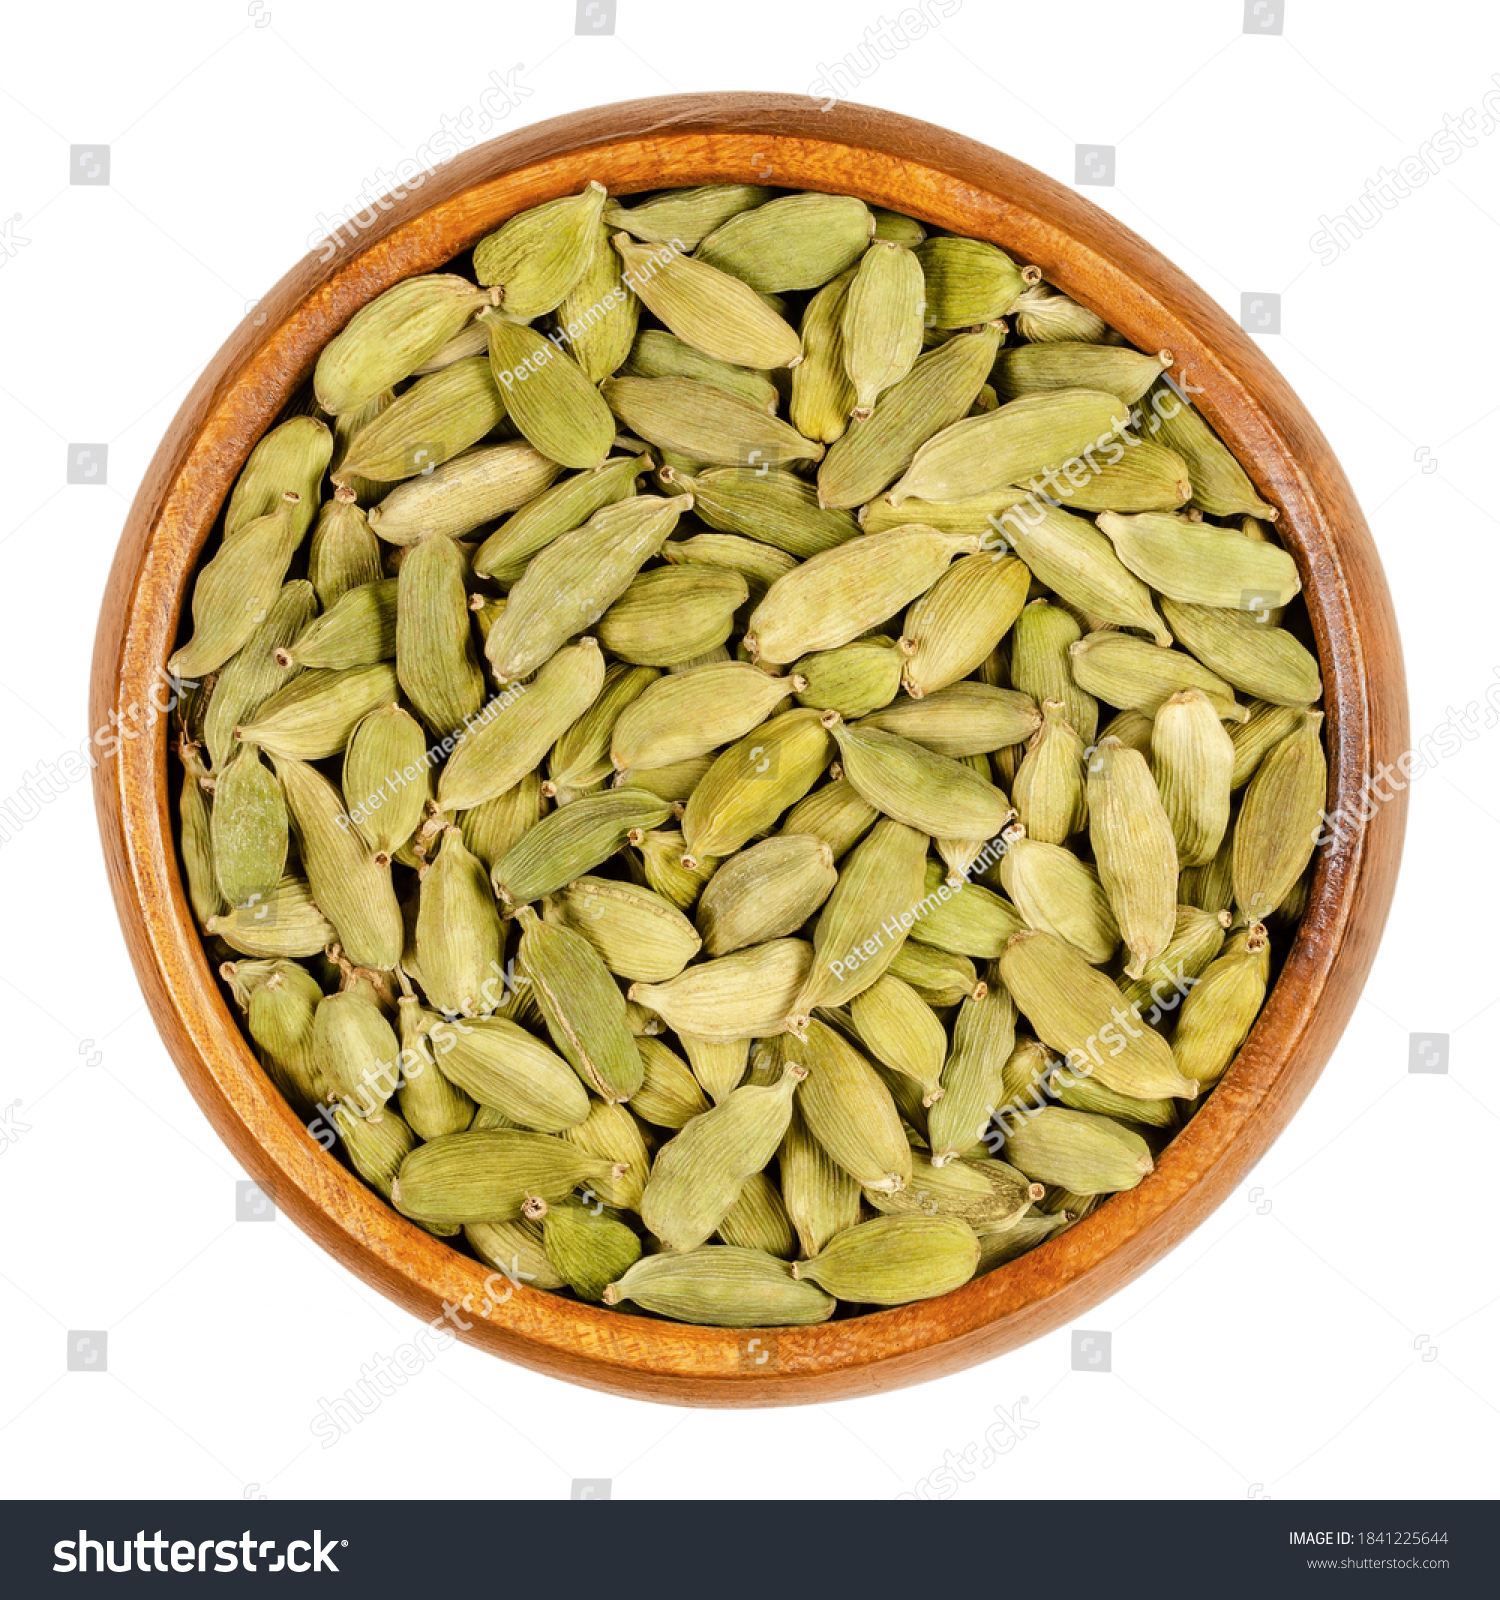 Green cardamom pods in a wooden bowl. True cardamom, processed pods and seeds of Elettaria cardamomum, sometimes cardamon or cardamum, used as a spice. Close-up, from above, isolated macro food photo. #1841225644